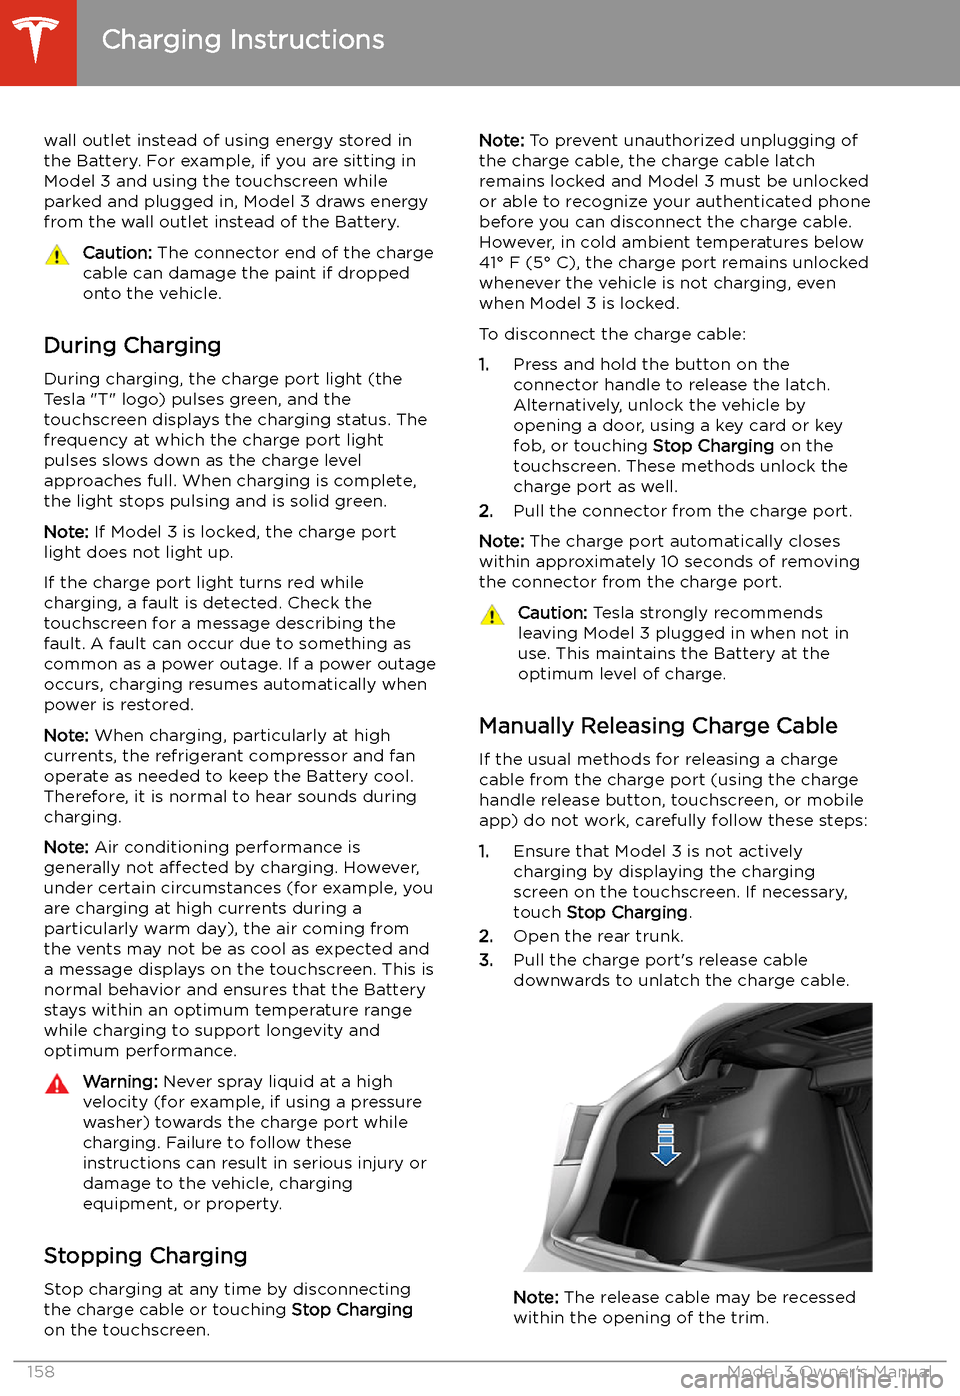 TESLA MODEL 3 2020  Owners Manuals wall outlet instead of using energy stored in
the Battery. For example, if you are sitting in
Model 3 and using the touchscreen while
parked and plugged in, Model 3 draws energy
from the wall outlet i